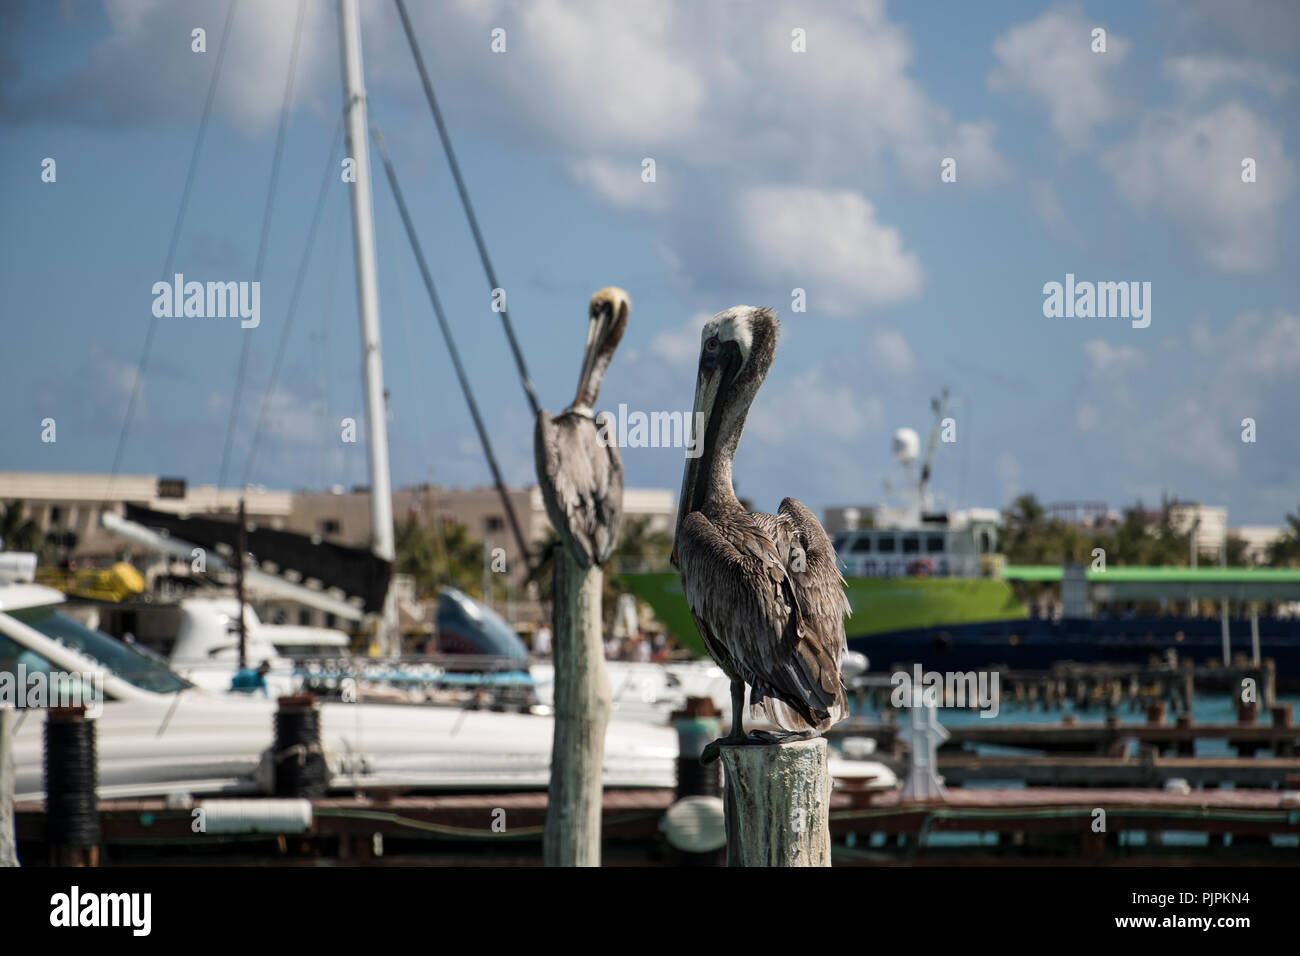 Pelicans standing on wooded polls in a ship yard. Boat dock with pelicans and clouds. Stock Photo